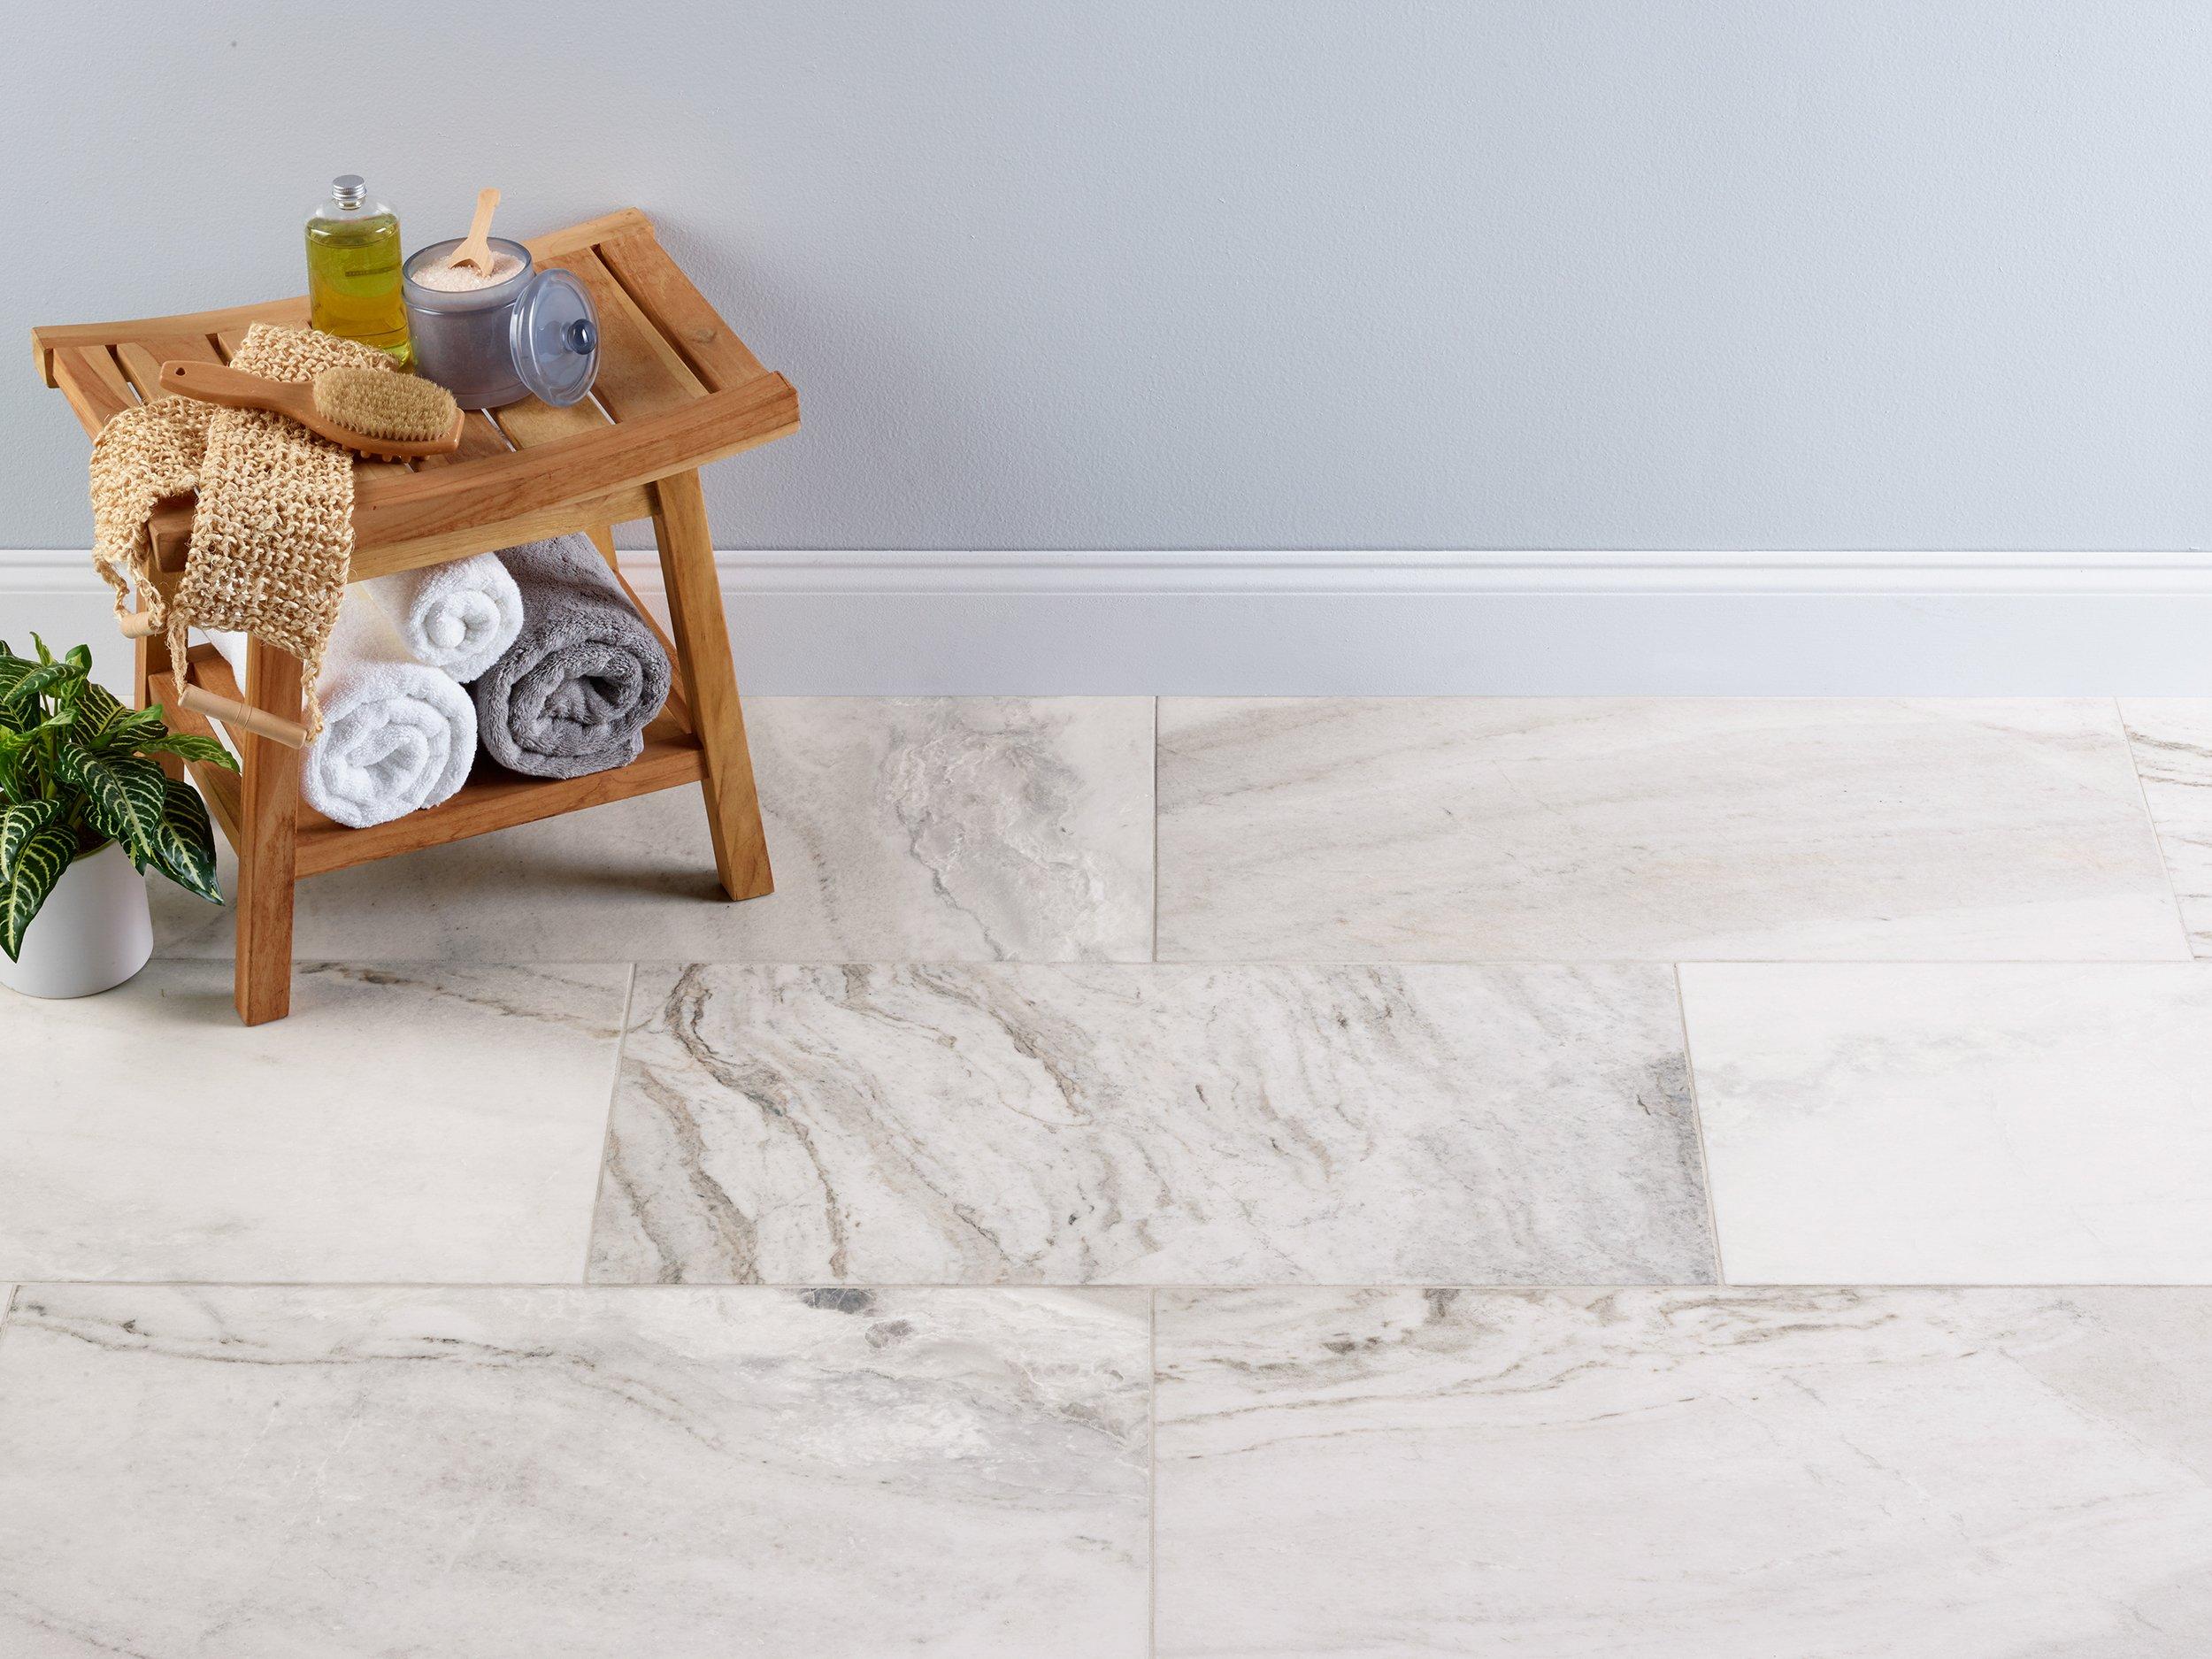 Bianco Orion 16x32 Brushed Marble Tile